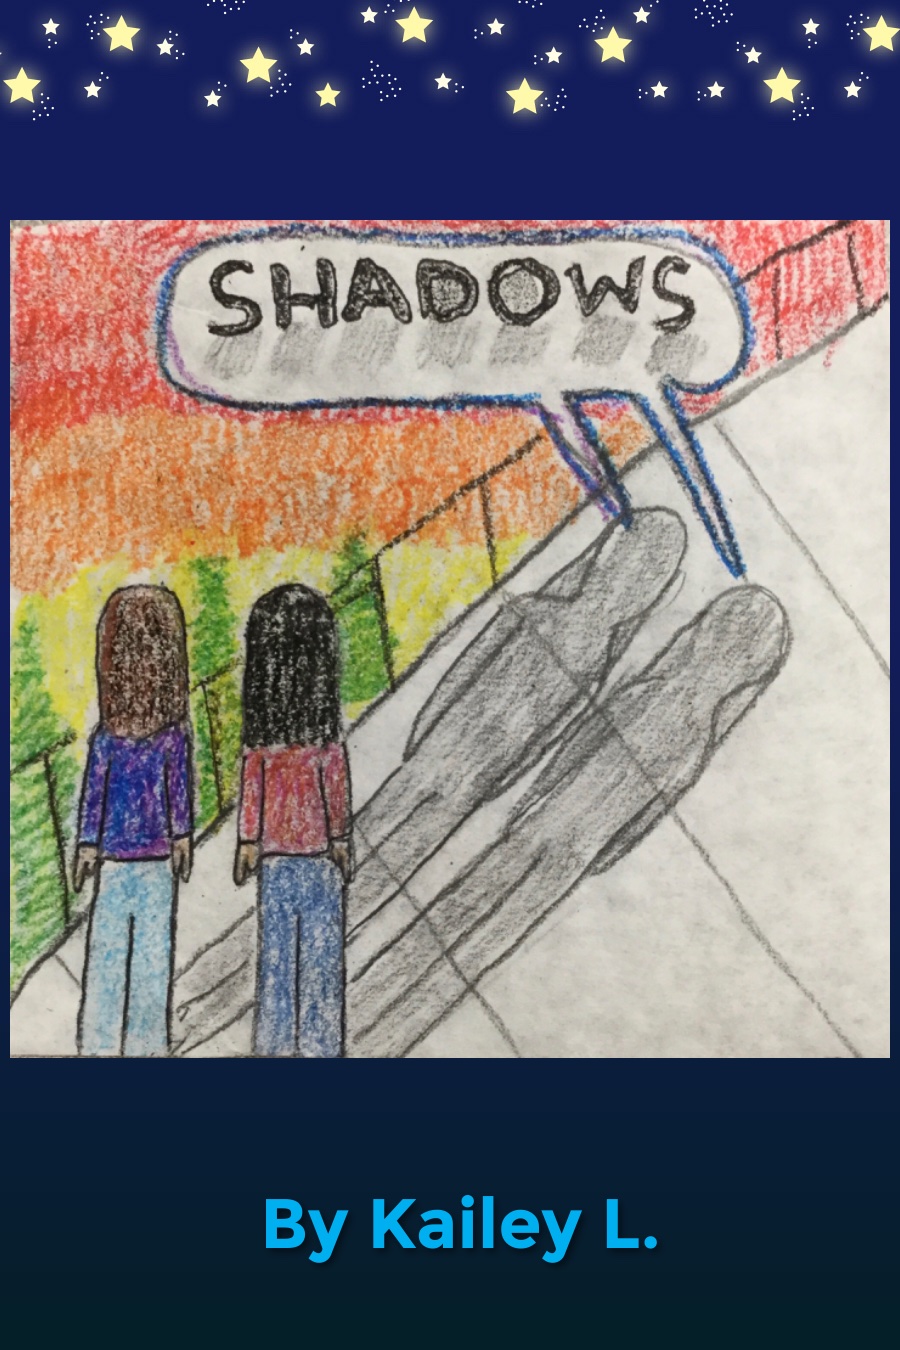 Shadows by Kailey L